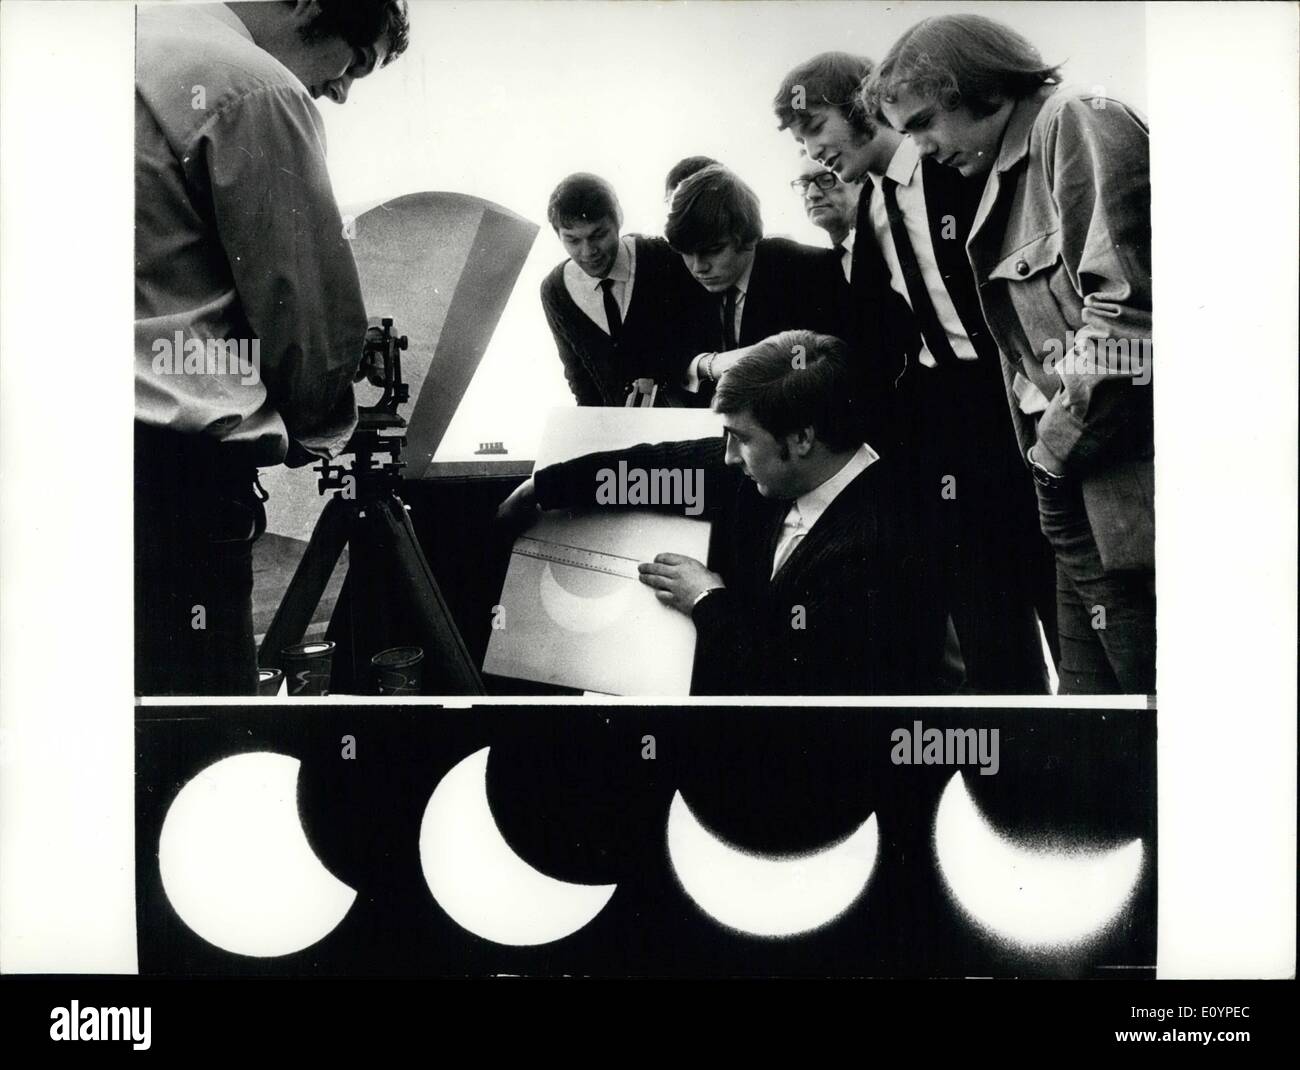 Feb. 02, 1971 - Partial eclipse of the sun: Weather on Tower Hill provided near perfect conditions for viewing yesterday morning's two-hour partial eclipse of the sun. Only part of the final phase of the eclipse was obscured by cloud. The shadow reached its maximum at 10.41 a.m. Three sunspots were visible during the early as black patches. Photo shows top picture: Christopher Laycock, 23, watched by other students as he measured yesterday's partial eclipse of the sun on an image projected through a Theodolyte with a mirror at the Merchant Navy College, Tower Hill Stock Photo